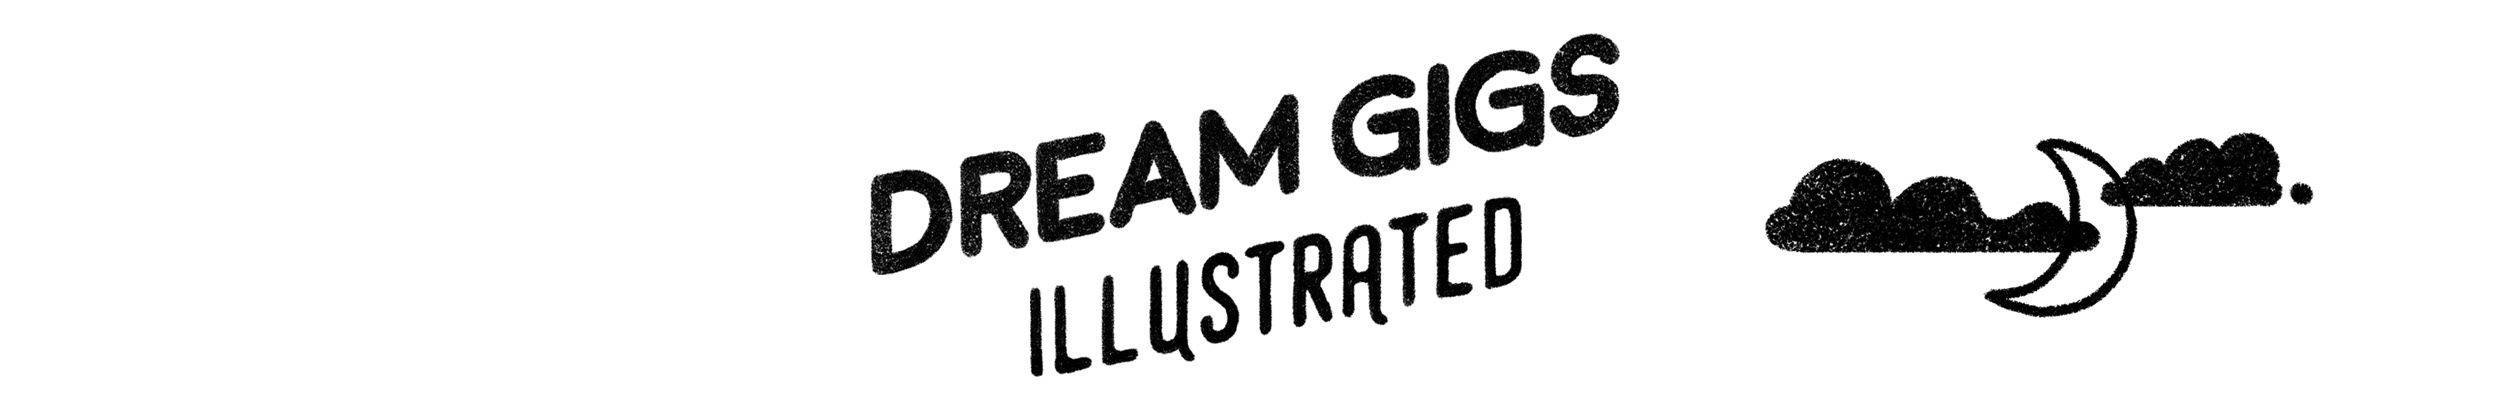 Dream Gigs Illustrated's profile banner